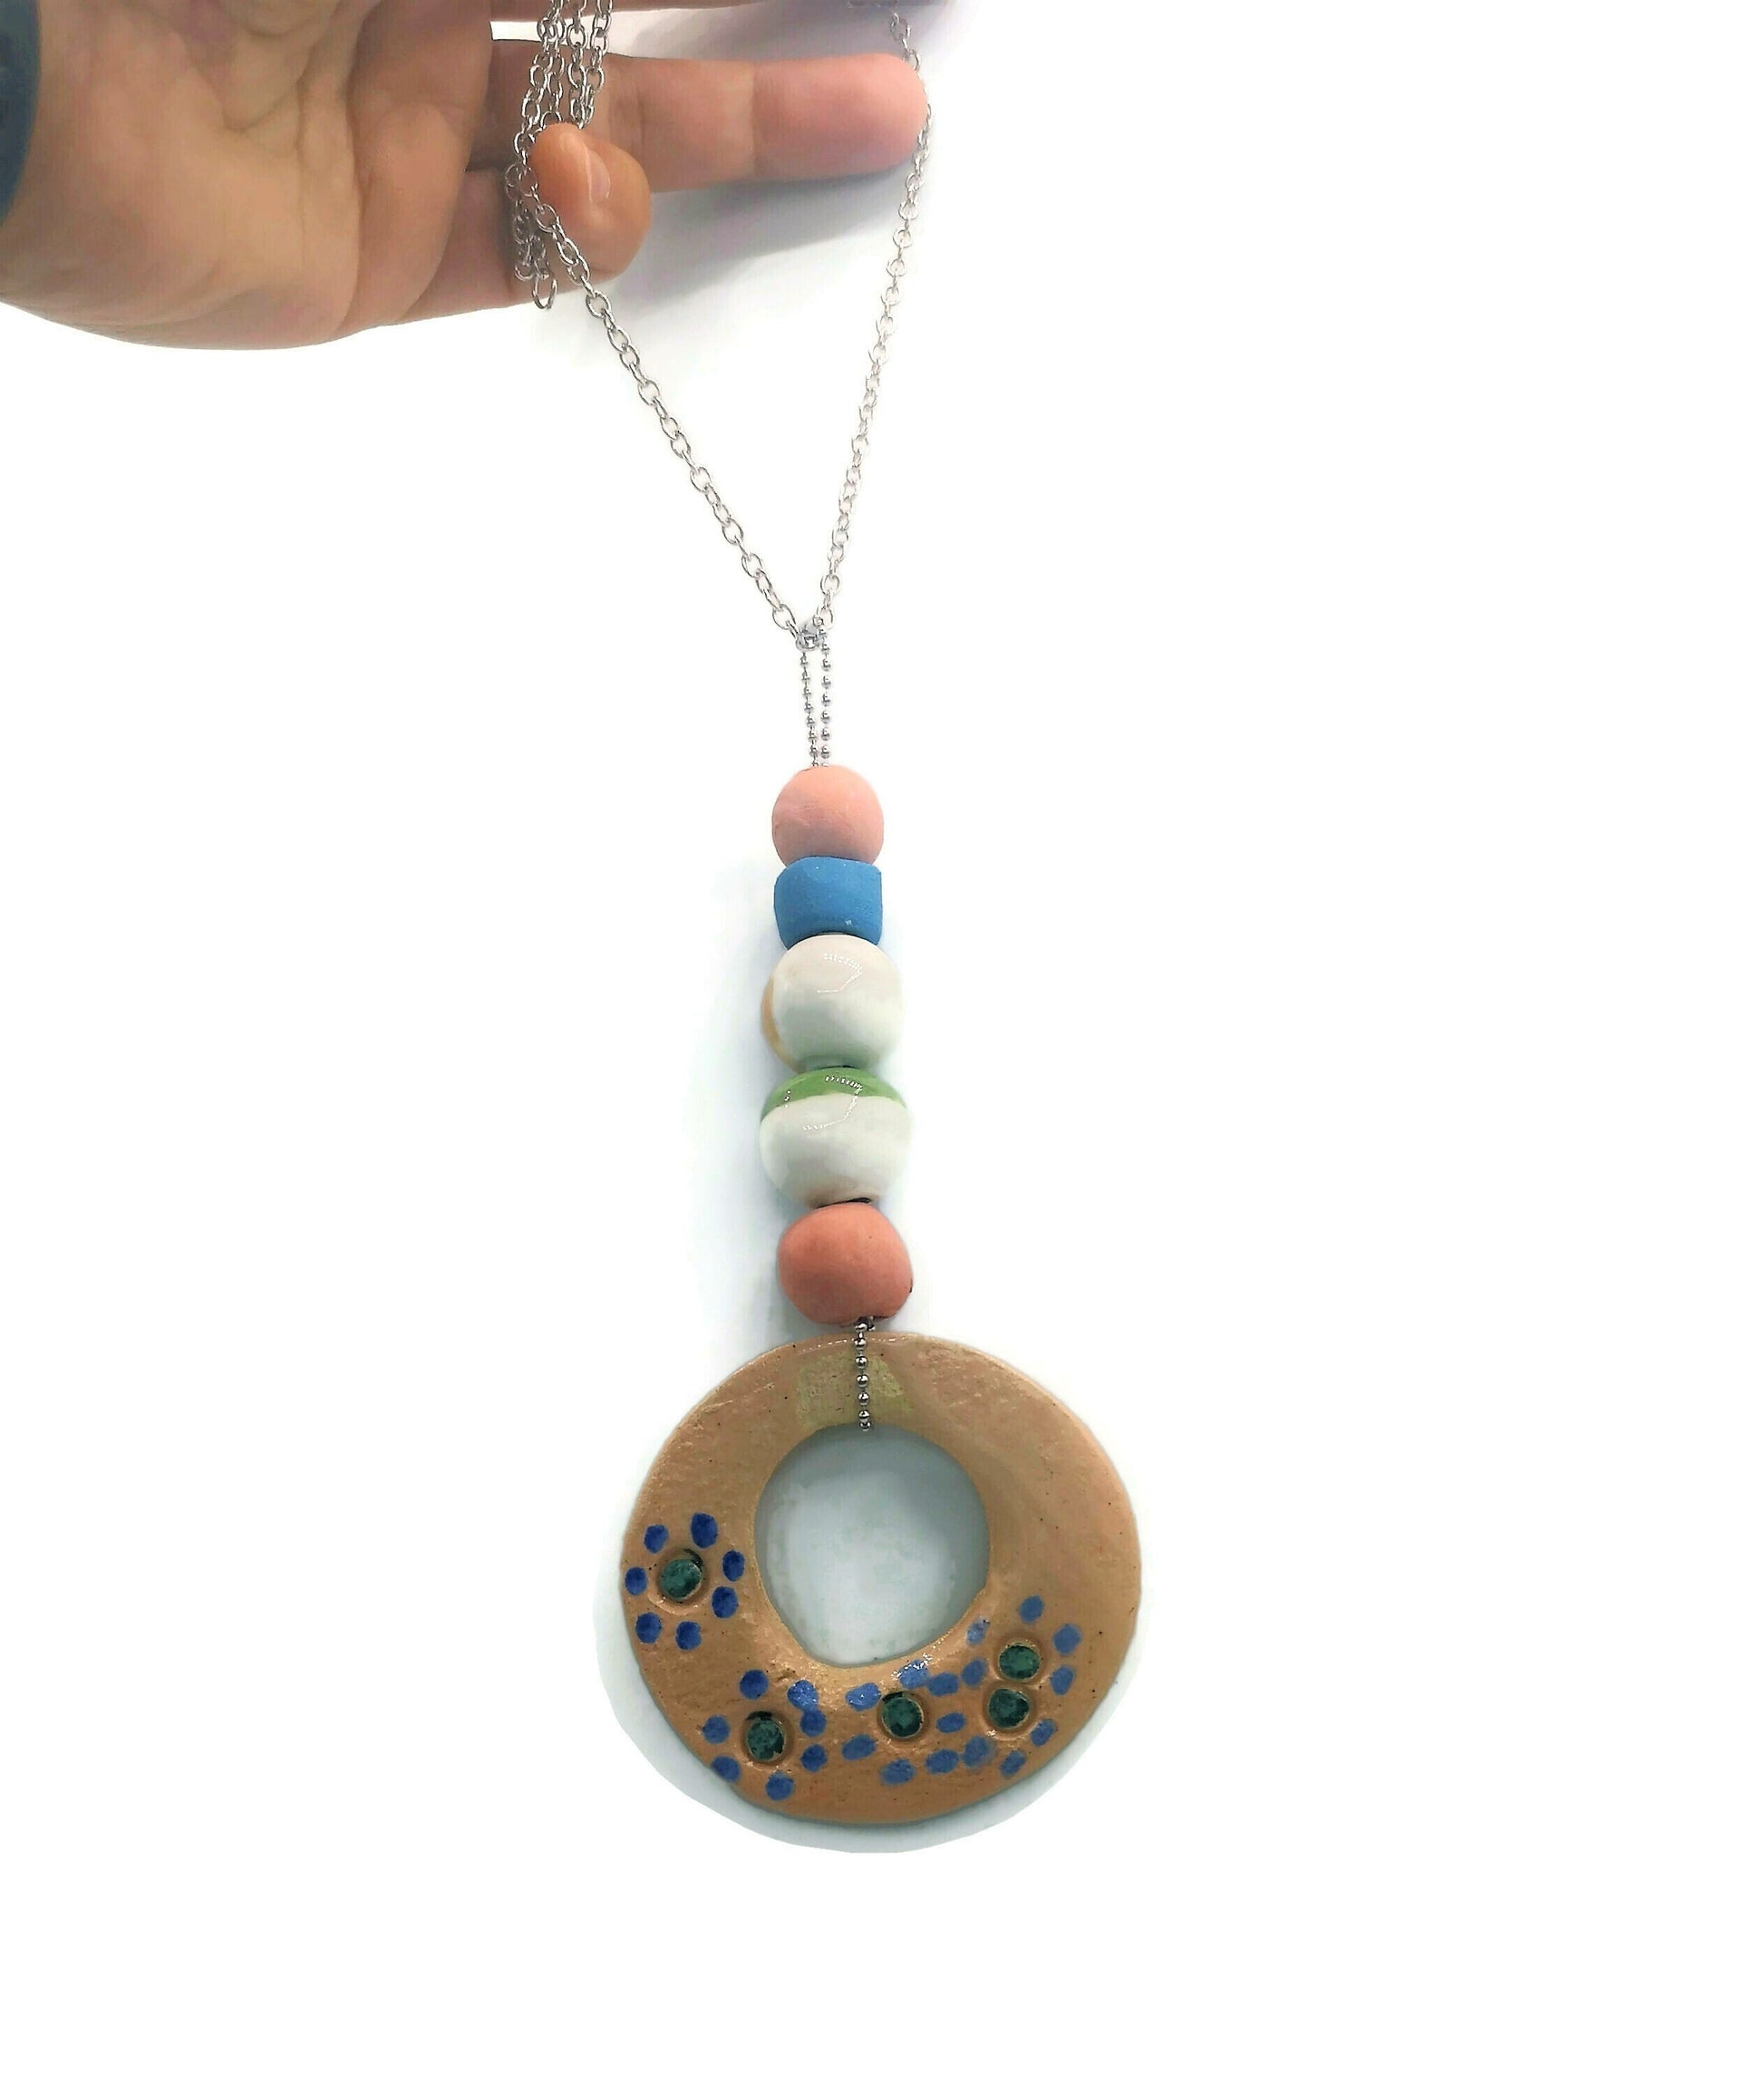 Statement Ceramic Pendant Necklace For Women, Everyday Beaded Necklace Best Gifts For Her, Best Sellers Unique Handmade Jewelry For Her - Ceramica Ana Rafael